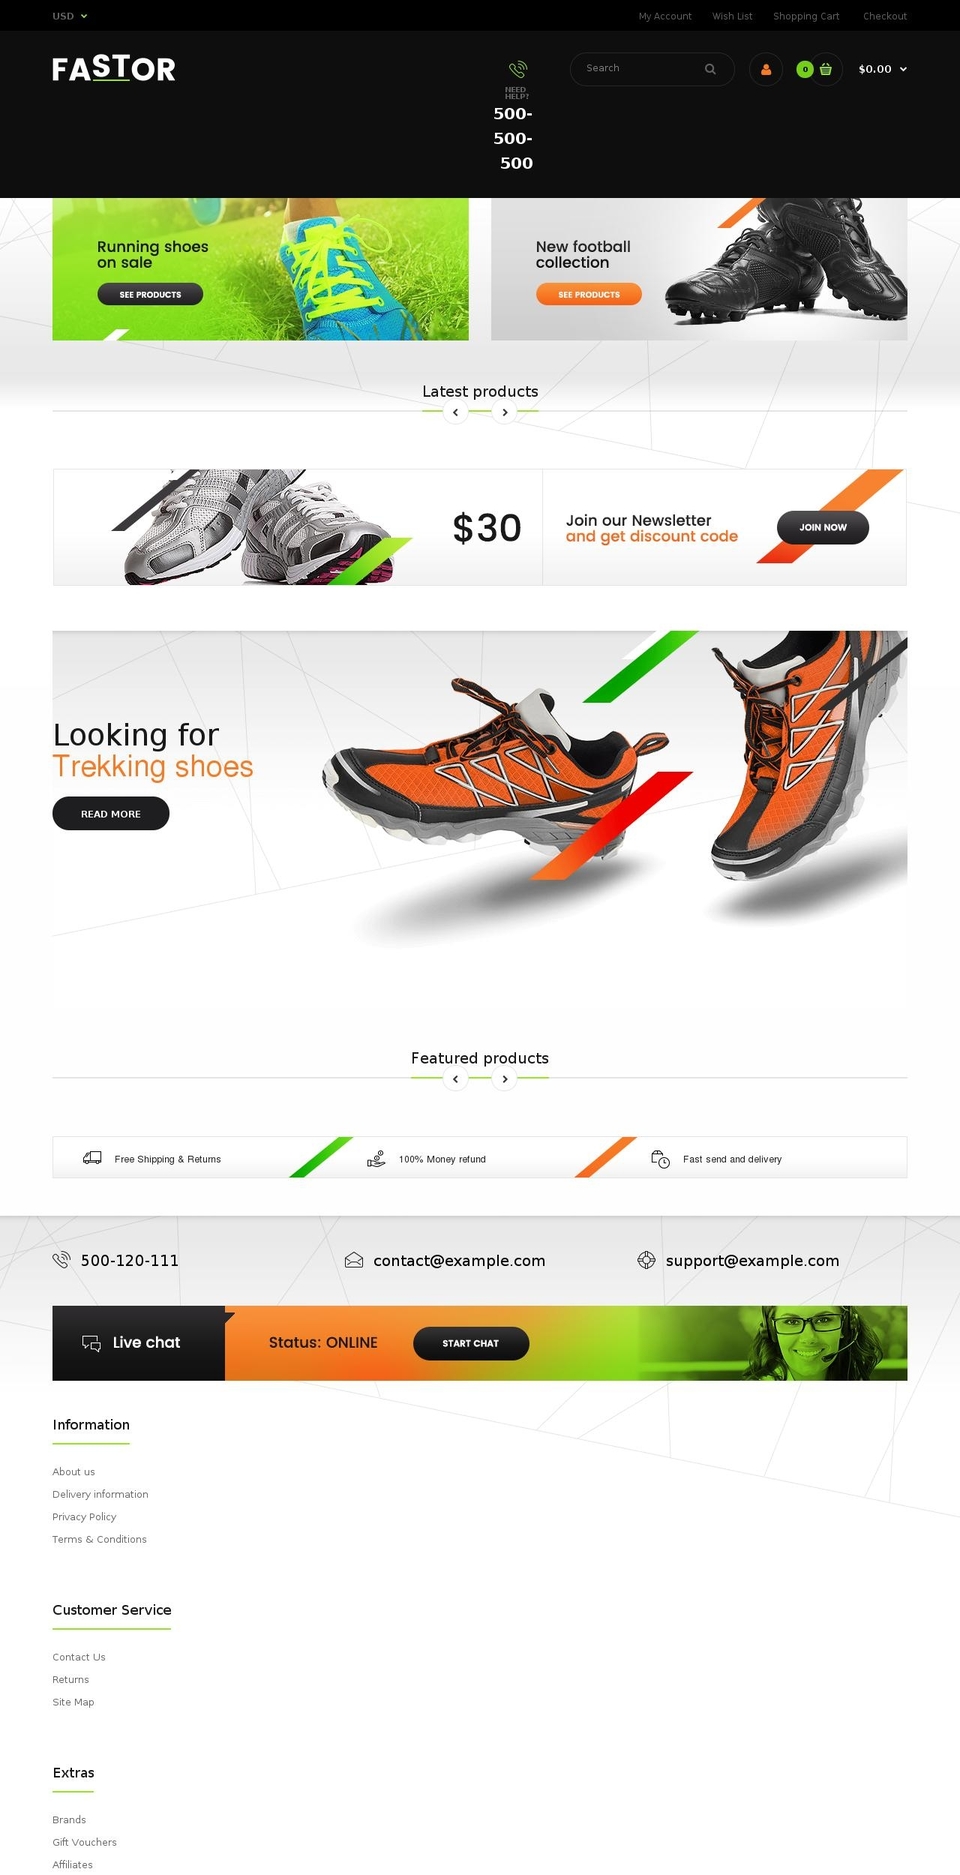 FASTOR Shopify theme site example rt-fastor-shoes2.myshopify.com